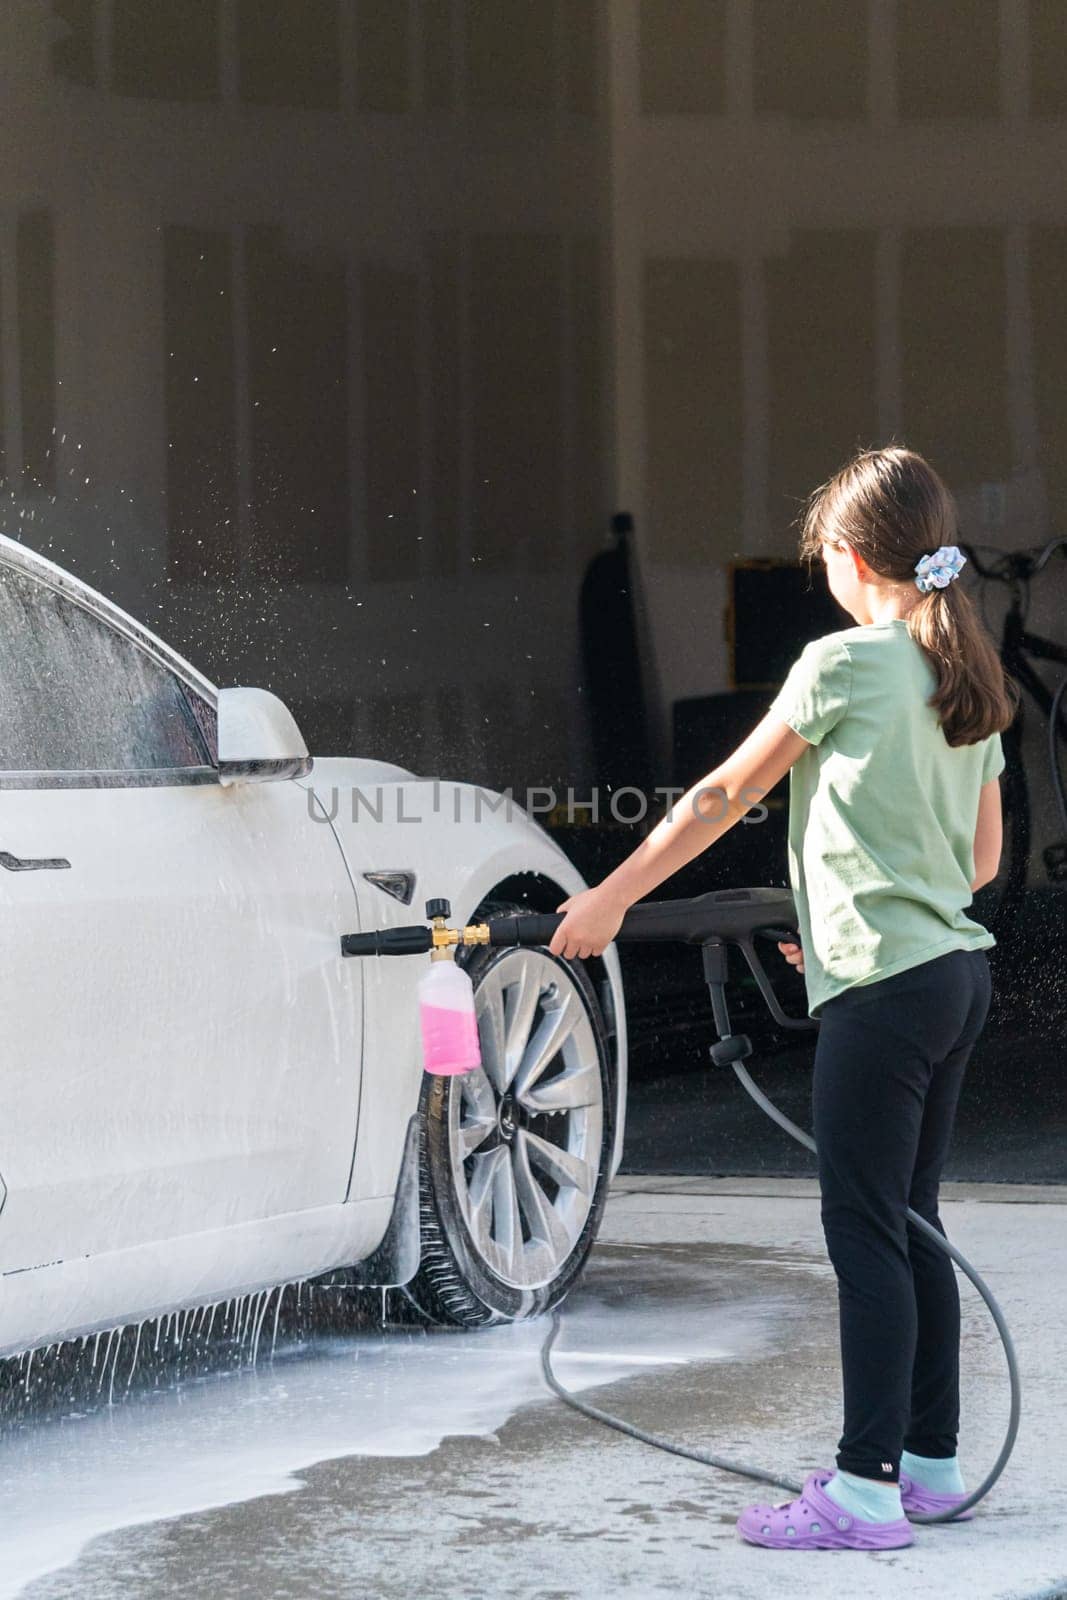 Denver, Colorado, USA-September 1, 2023-A young girl enthusiastically assists in washing the family's electric car in their suburban driveway.